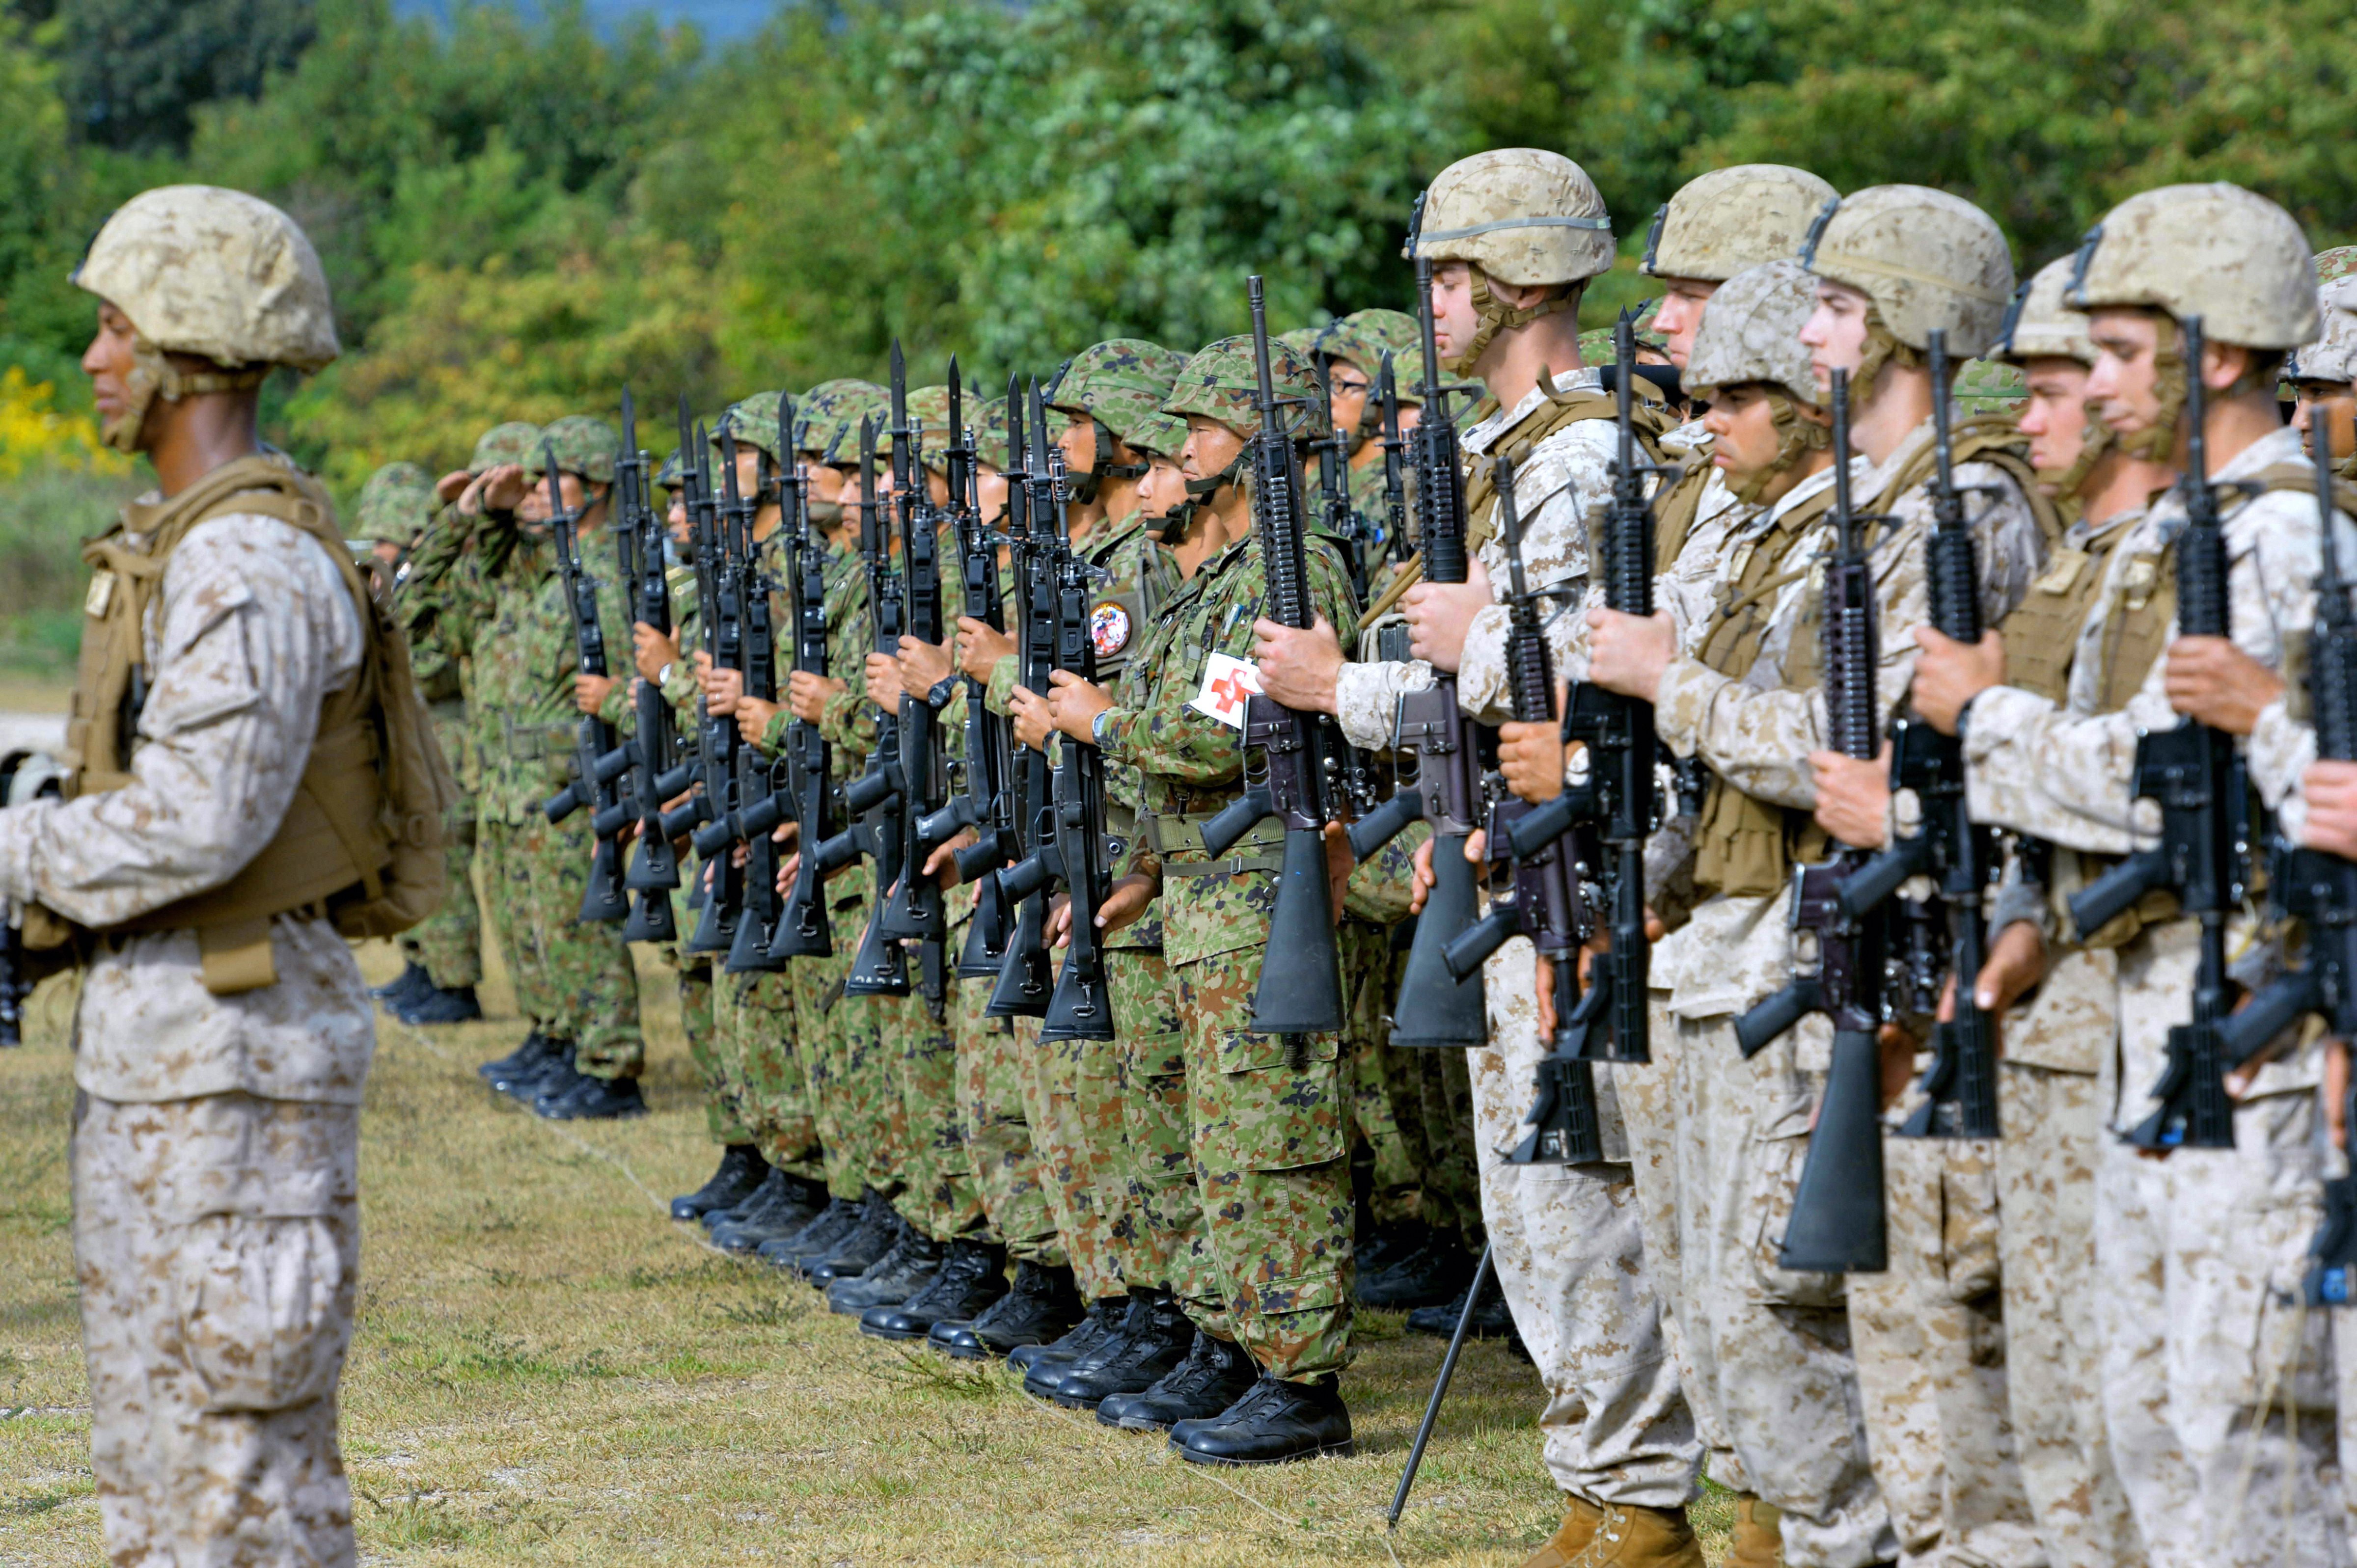 U.S. Marines and members of the Japan Ground Self-Defense Force line up before a joint exercise at the JGSDF's Aibano facility in Takashima, Japan, on Oct. 8, 2013 (The Asahi Shimbun)